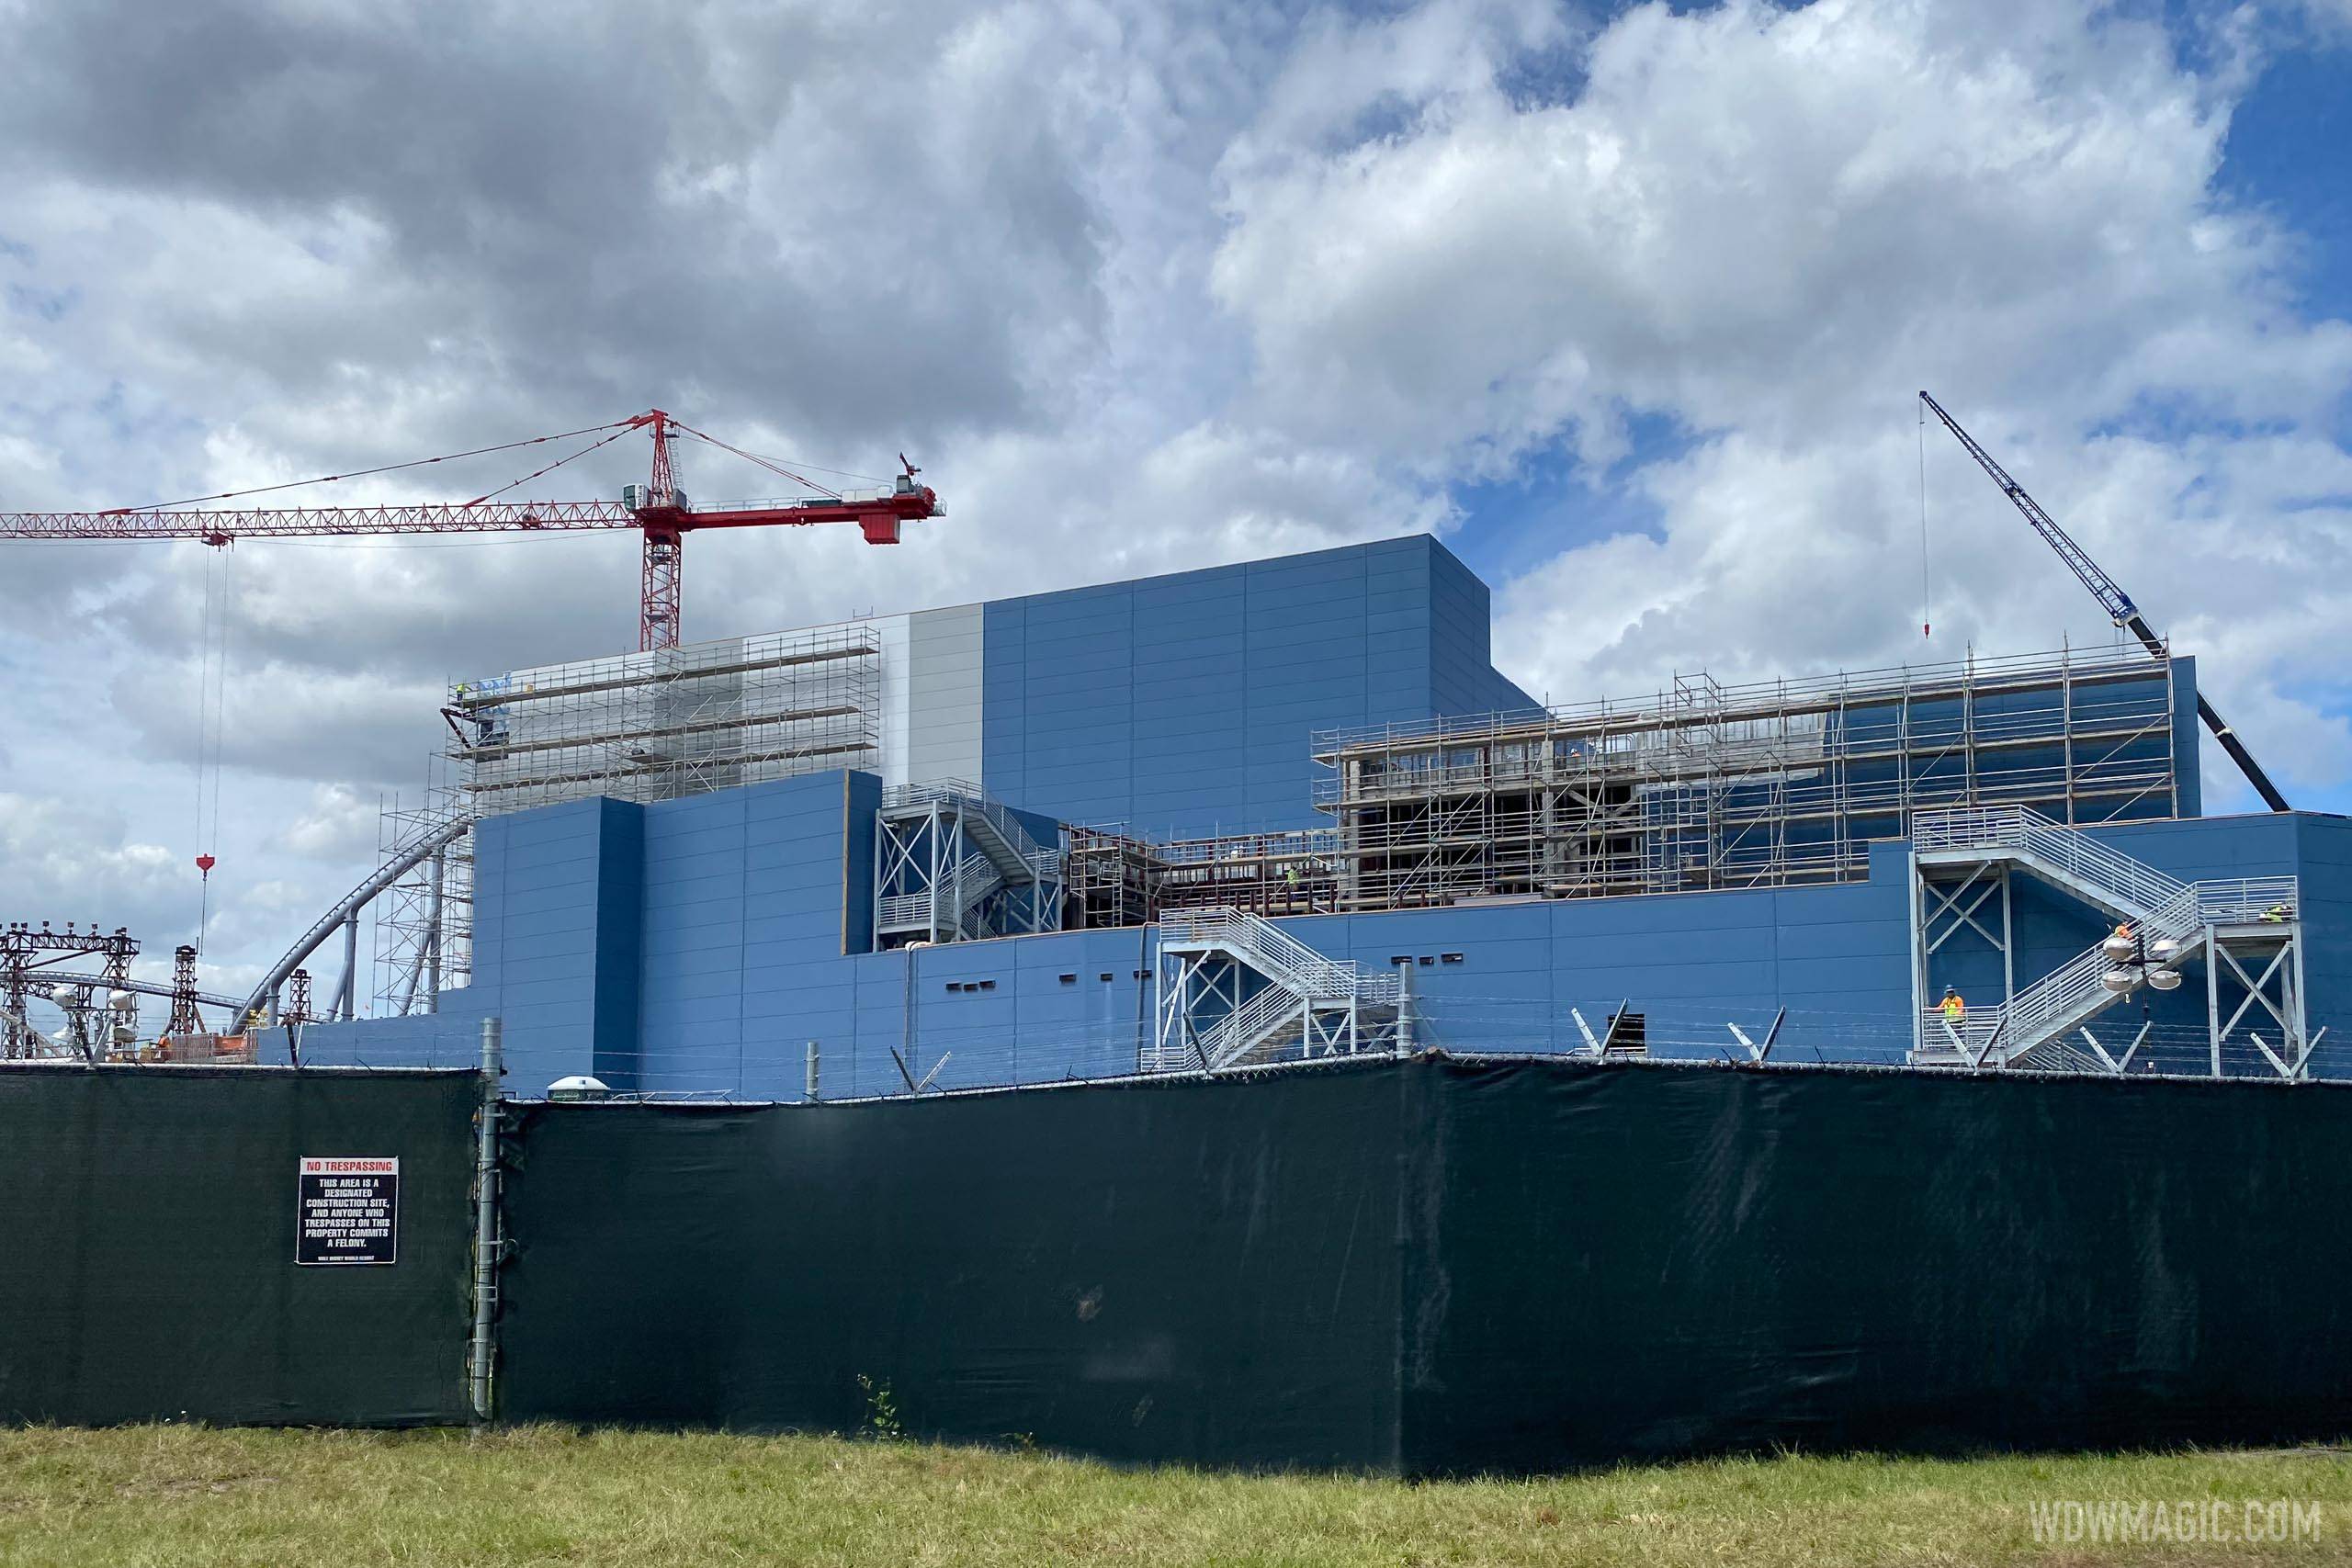 PHOTOS - Back-side of TRON Lightcycle Run coaster show building nearly fully enclosed